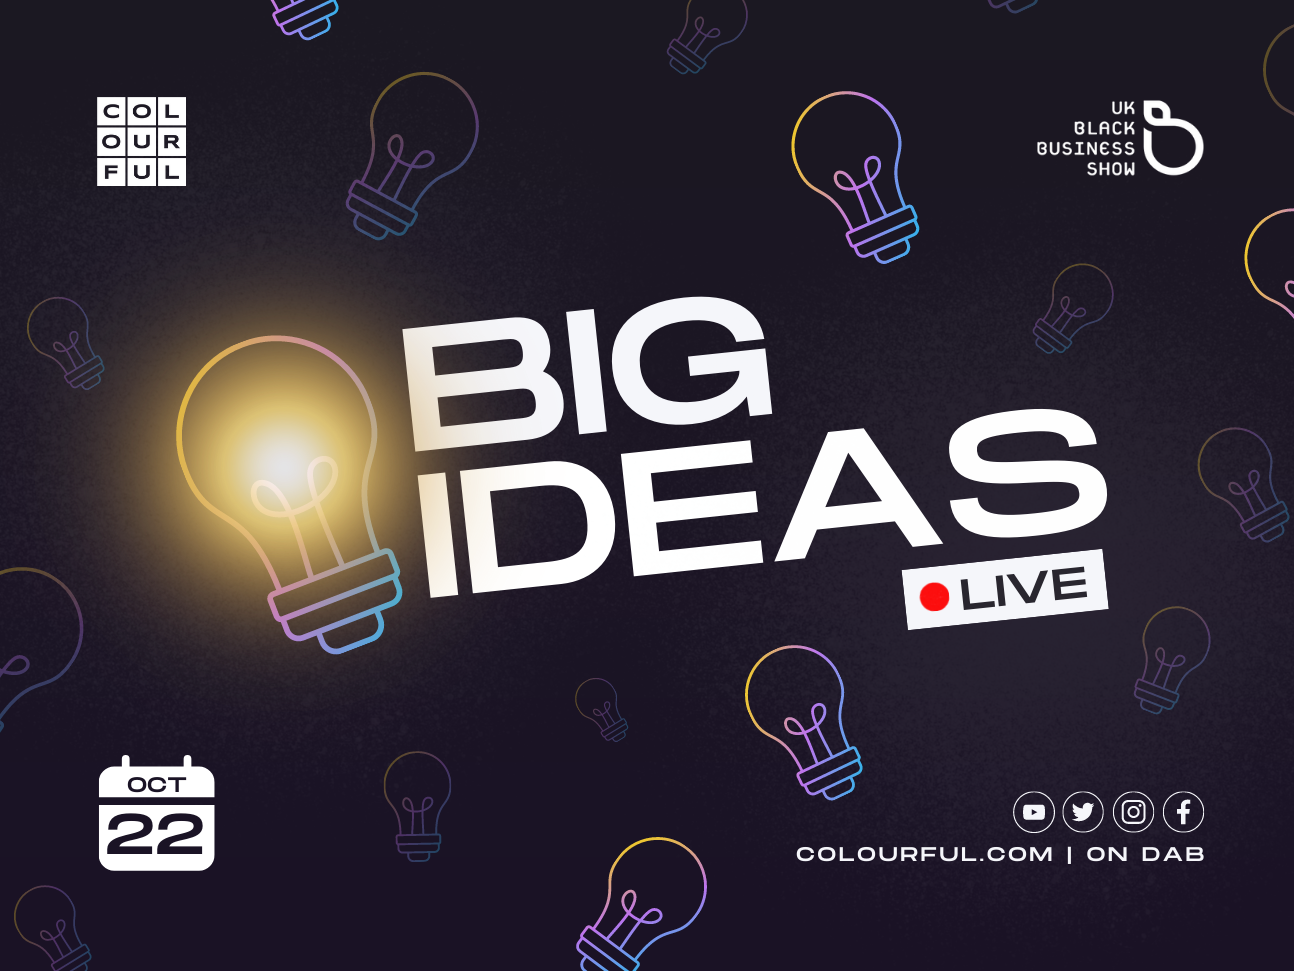 Big Ideas - LIVE from UK Black Business Show 2022!